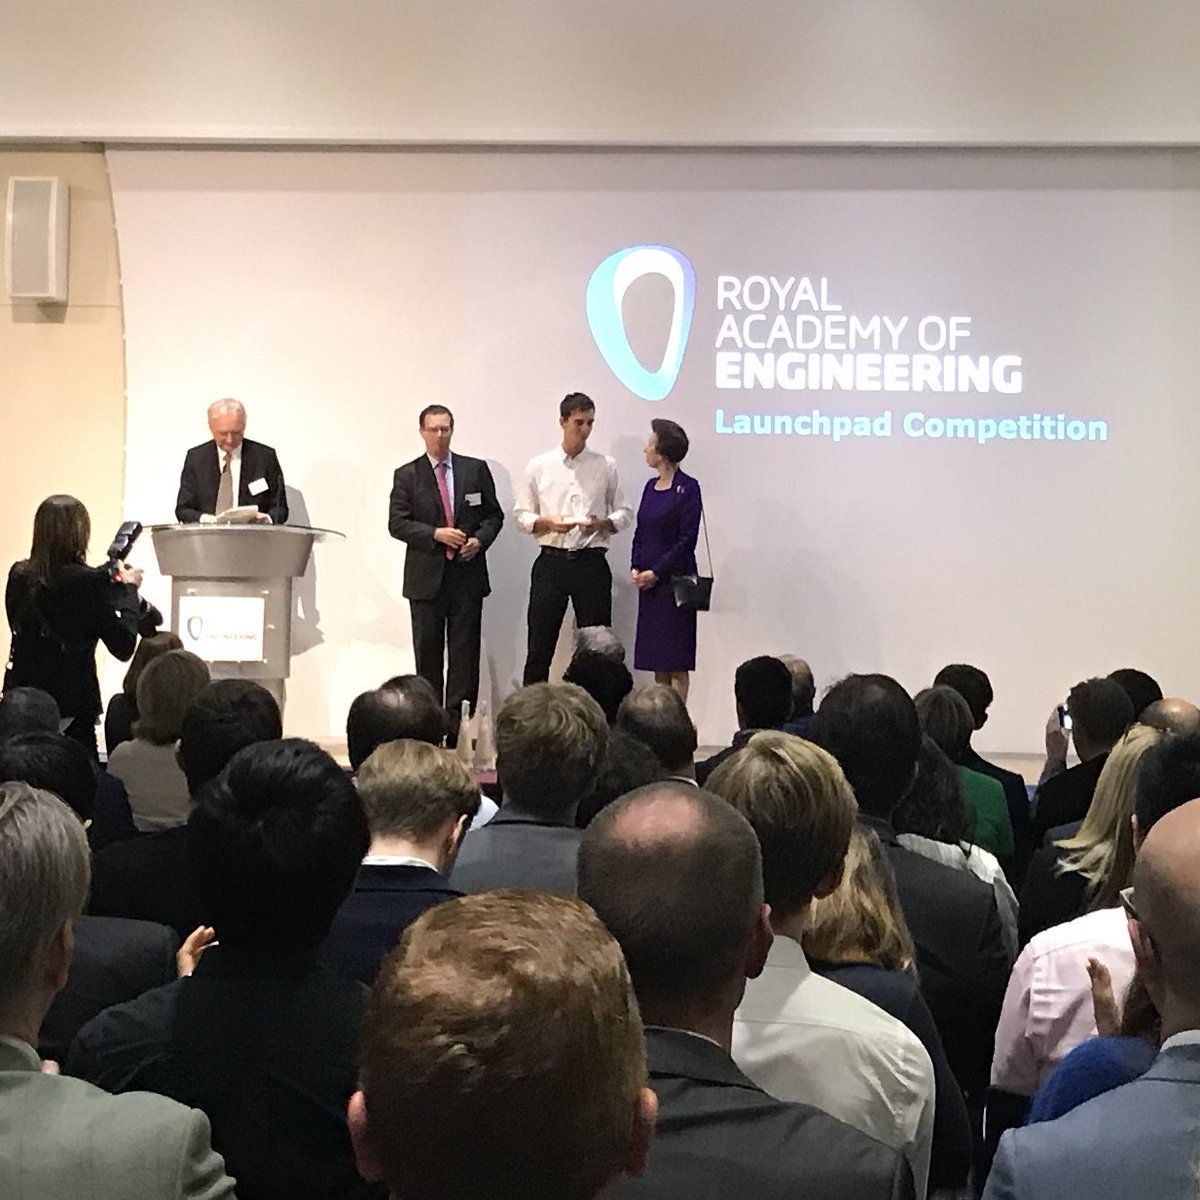 We are ecstatic to announce last night we won the JC Gammon Award hosted by @RAEng_Hub This has been the most incredible week so far and has really reinforced our drive to create a material revolution! Thanks @RAEngNews we can't wait to be part of the hub #engineering #materials